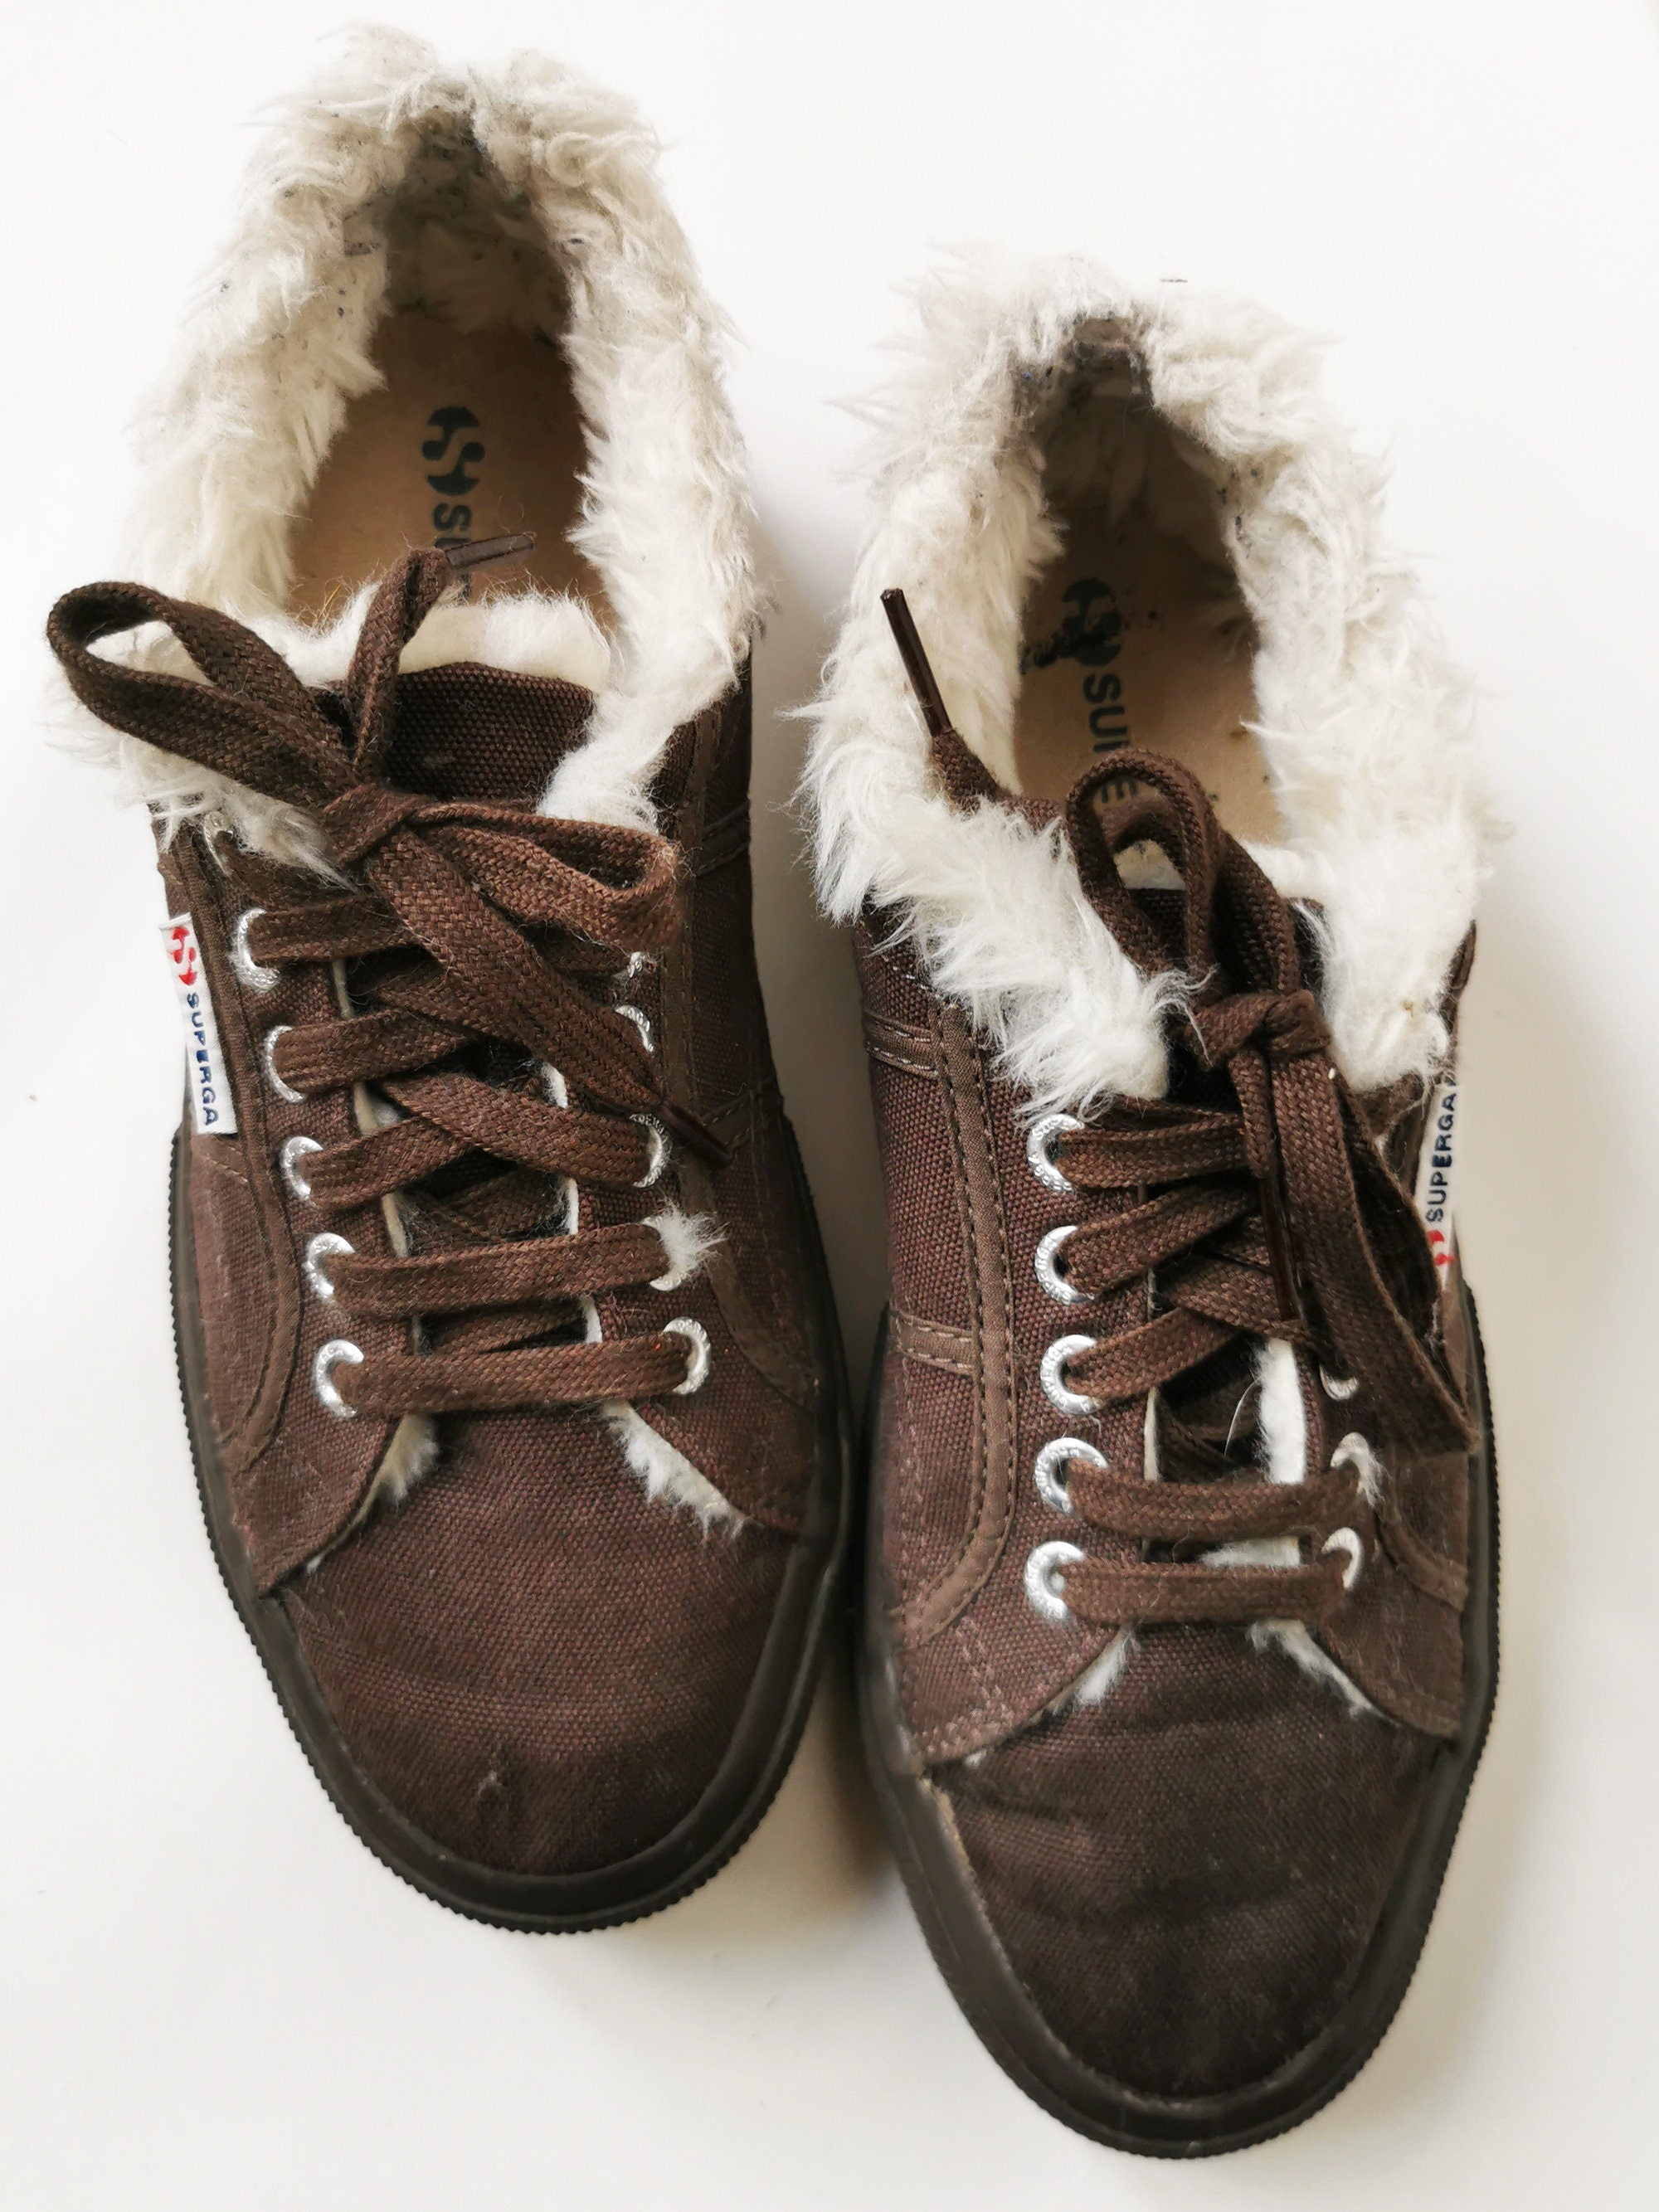 Vintage 90s brown faux fur lined sneakers shoes